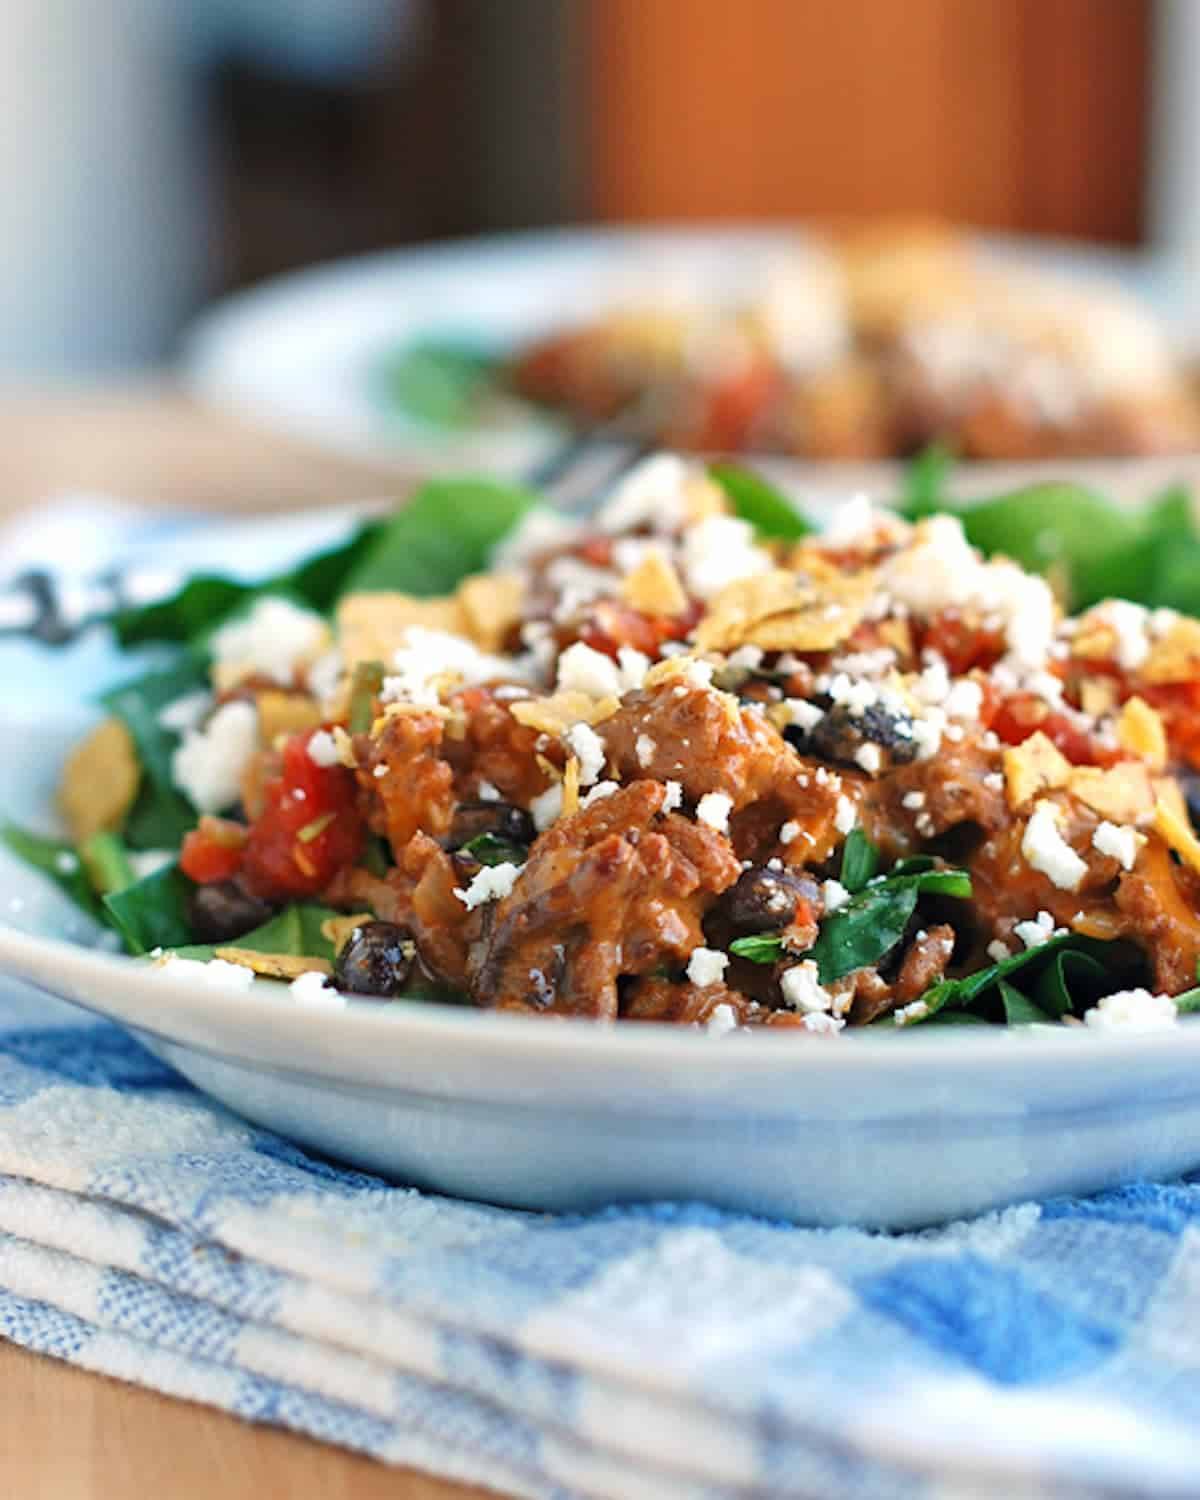 Tex-mex taco salad topped with tex-mex style ground beef.